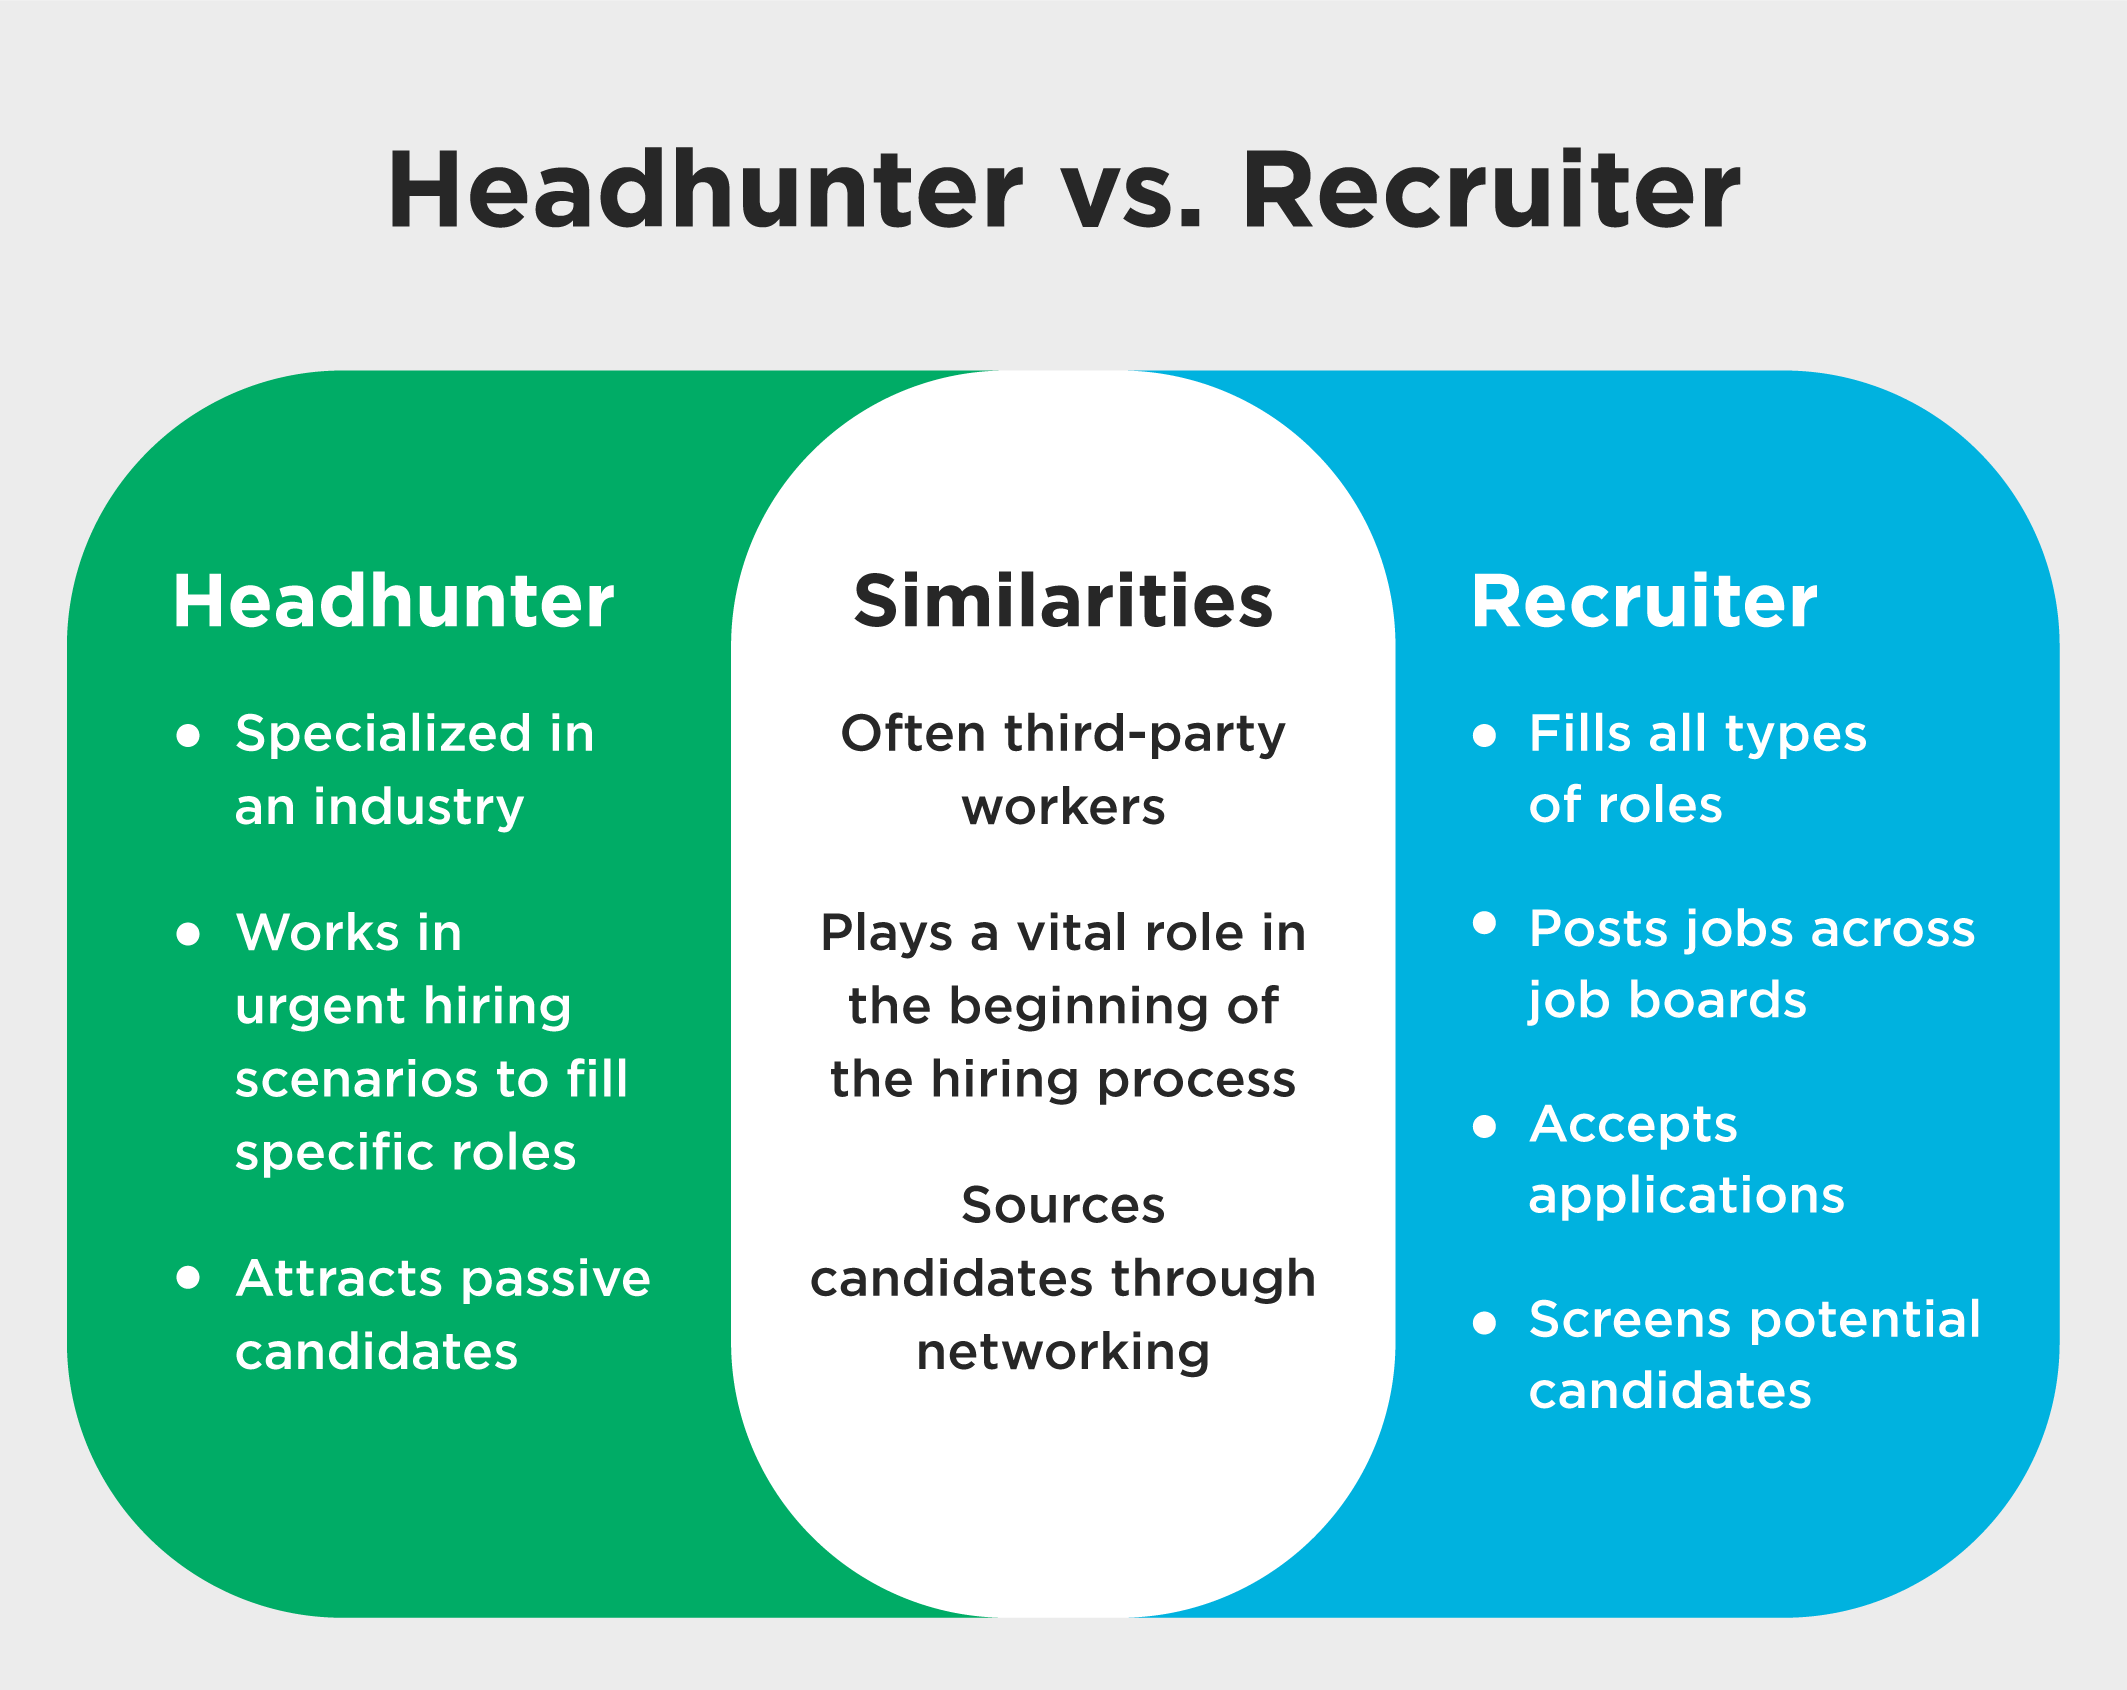 Headhunting involves a personalized, direct approach, frequently with confidential interactions and negotiations. 